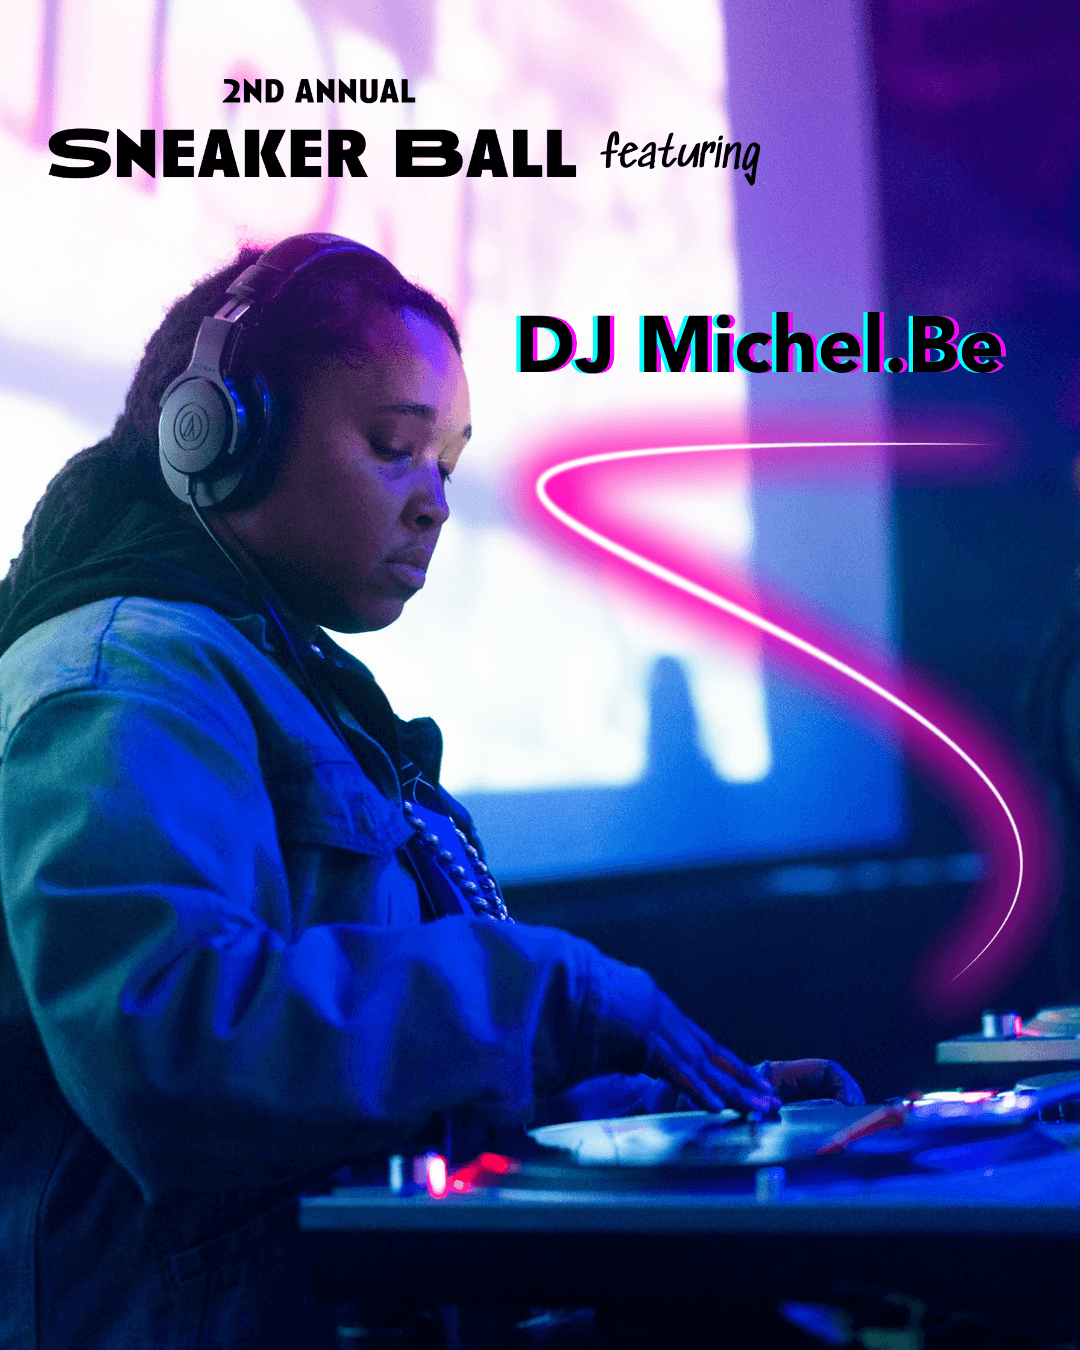 2nd Annual Sneaker Ball featuring DJ Michel.Be